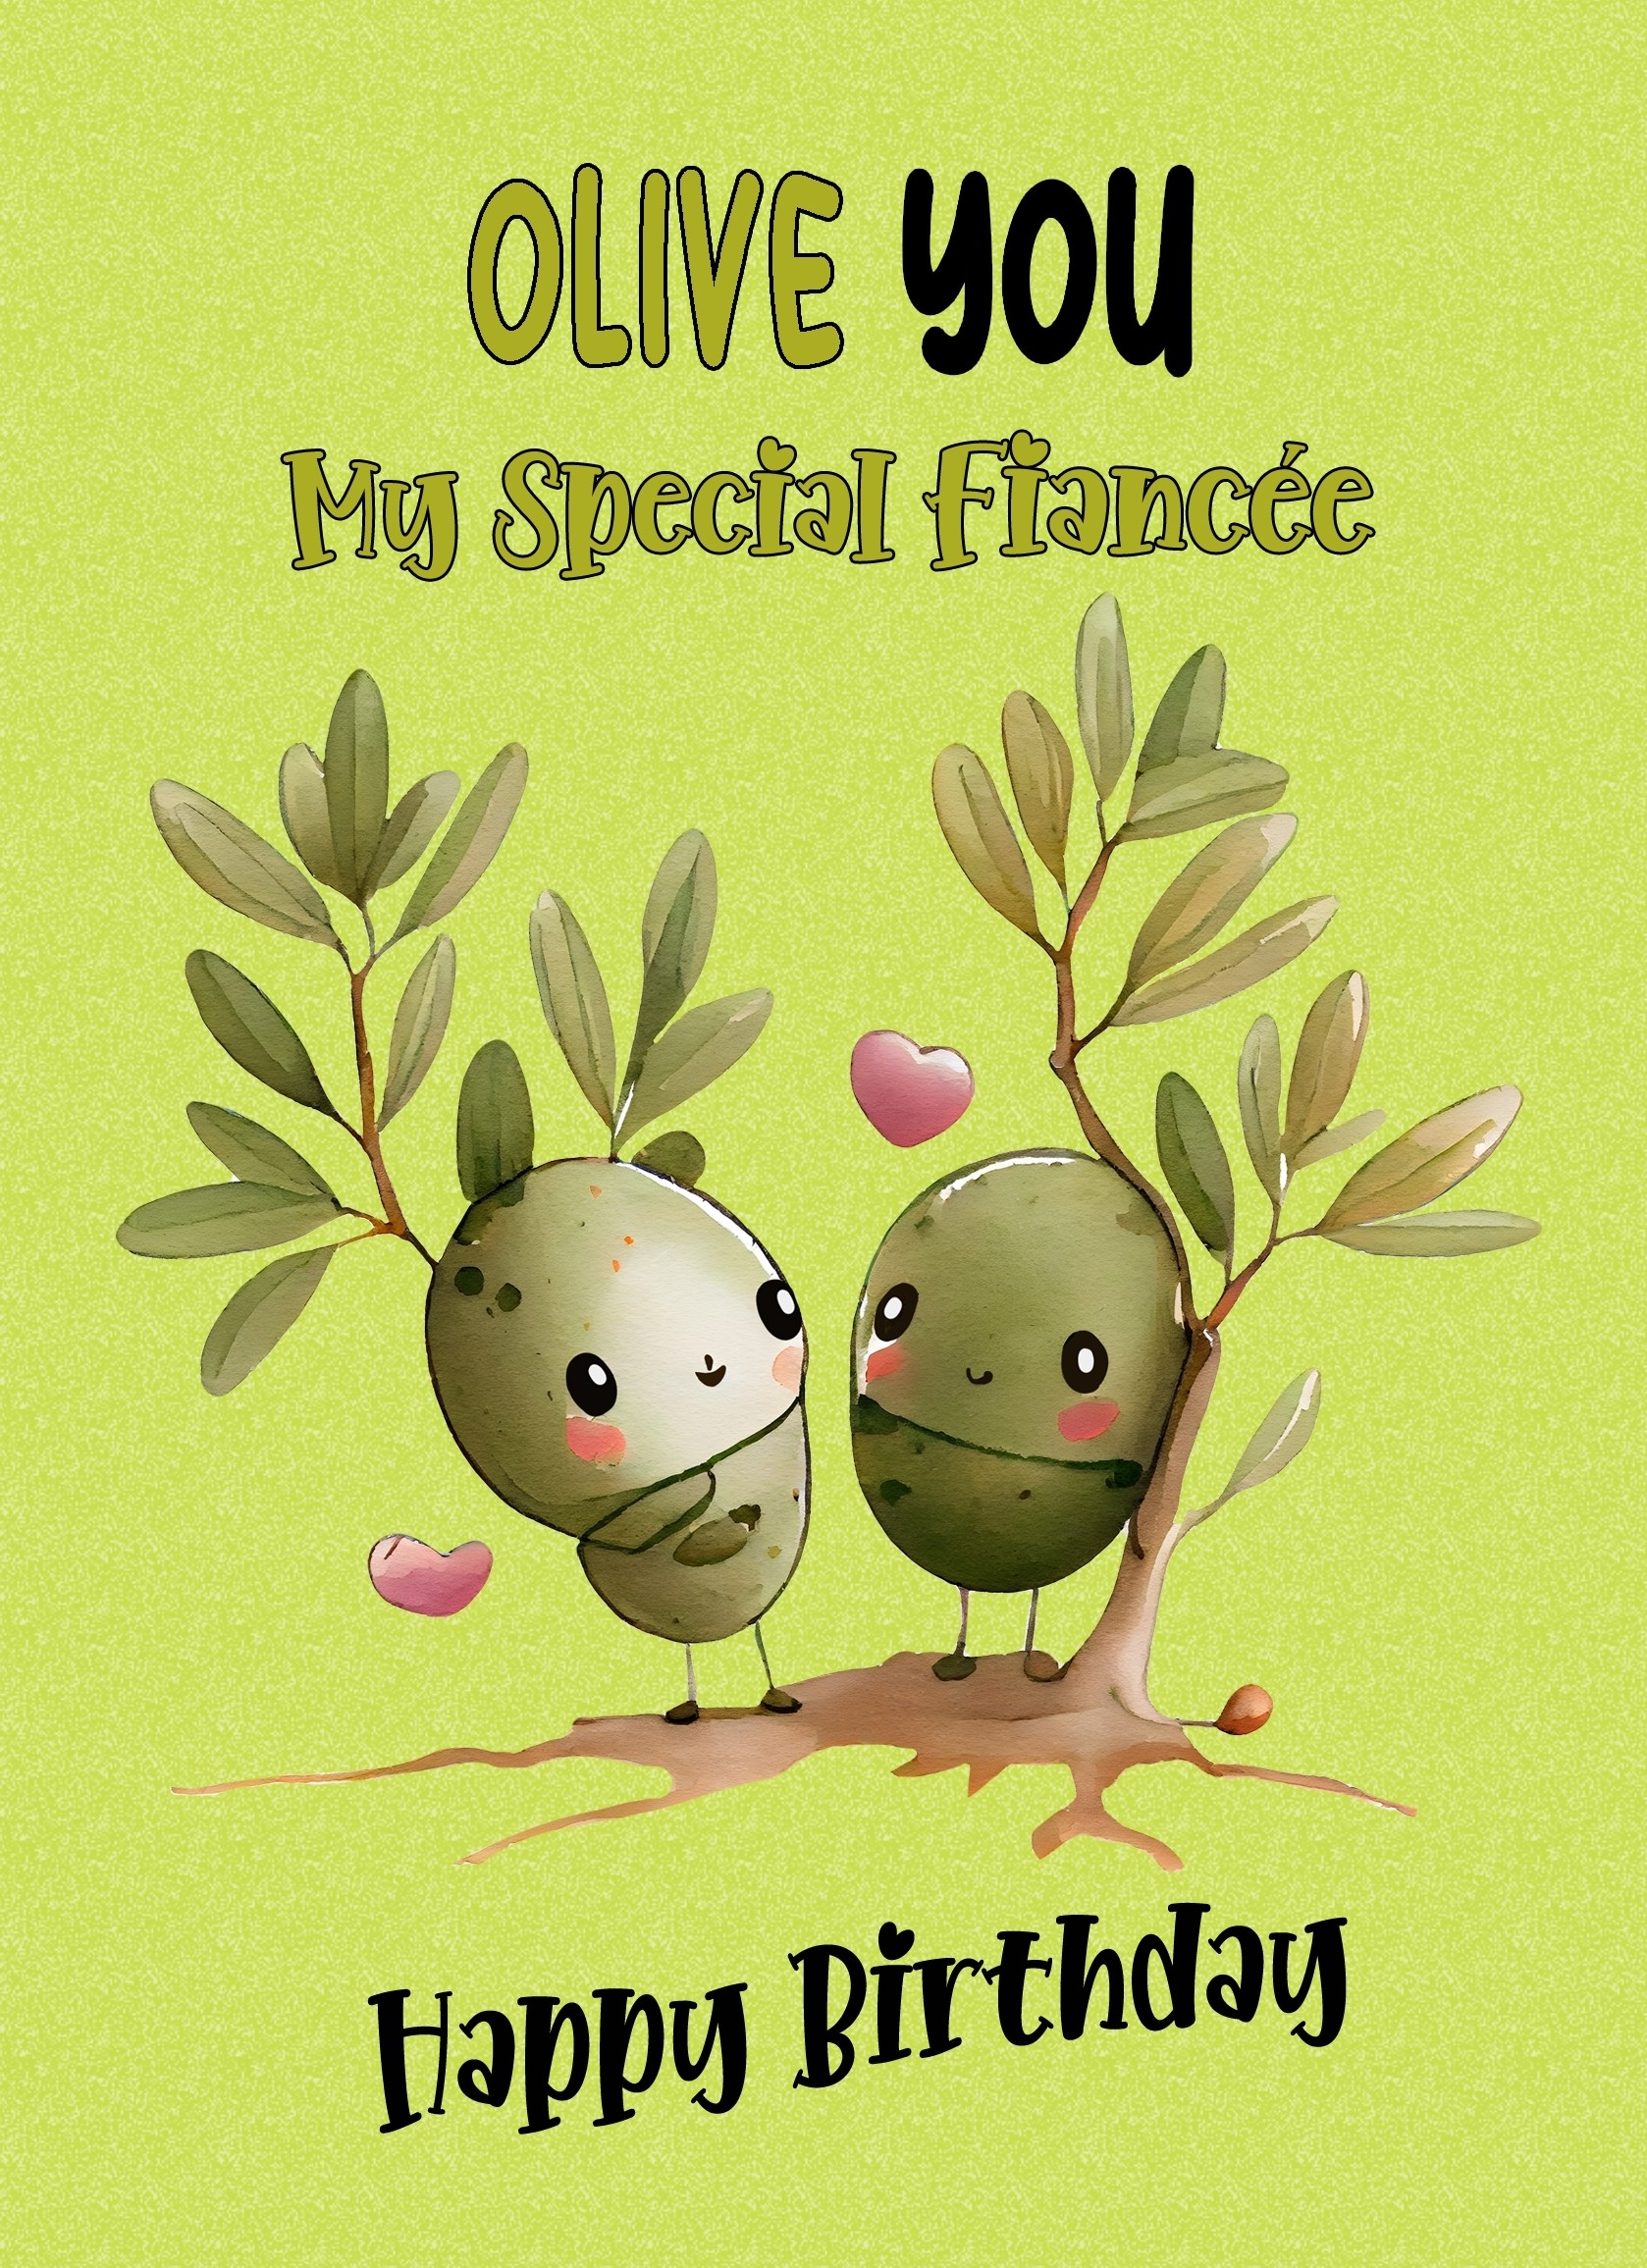 Funny Pun Romantic Birthday Card for Fiancee (Olive You)